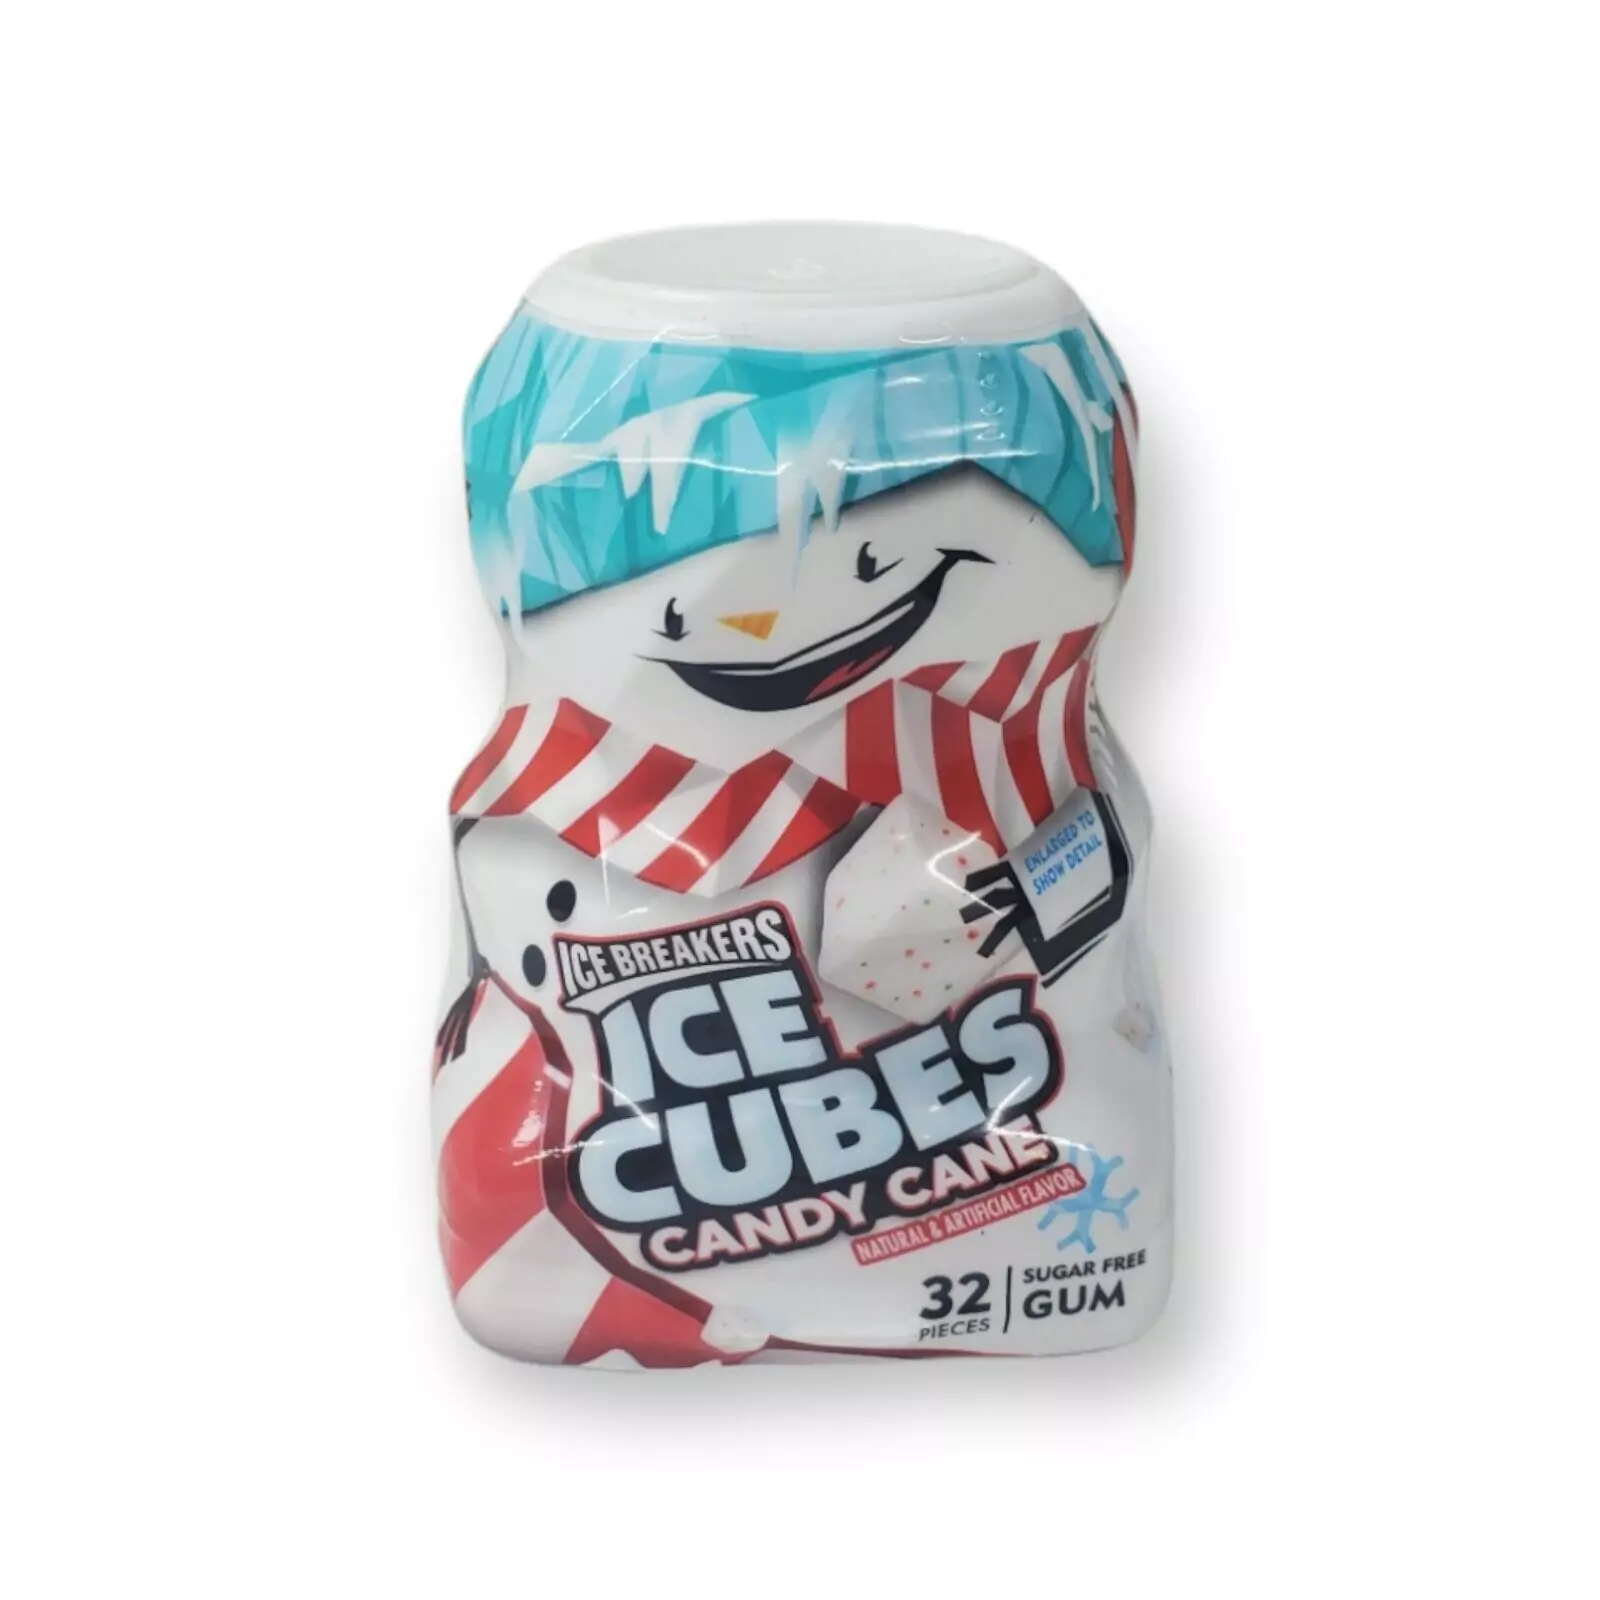 Ice Breakers Ice Cubes Candy Cane Sugar Free Chewing Gum